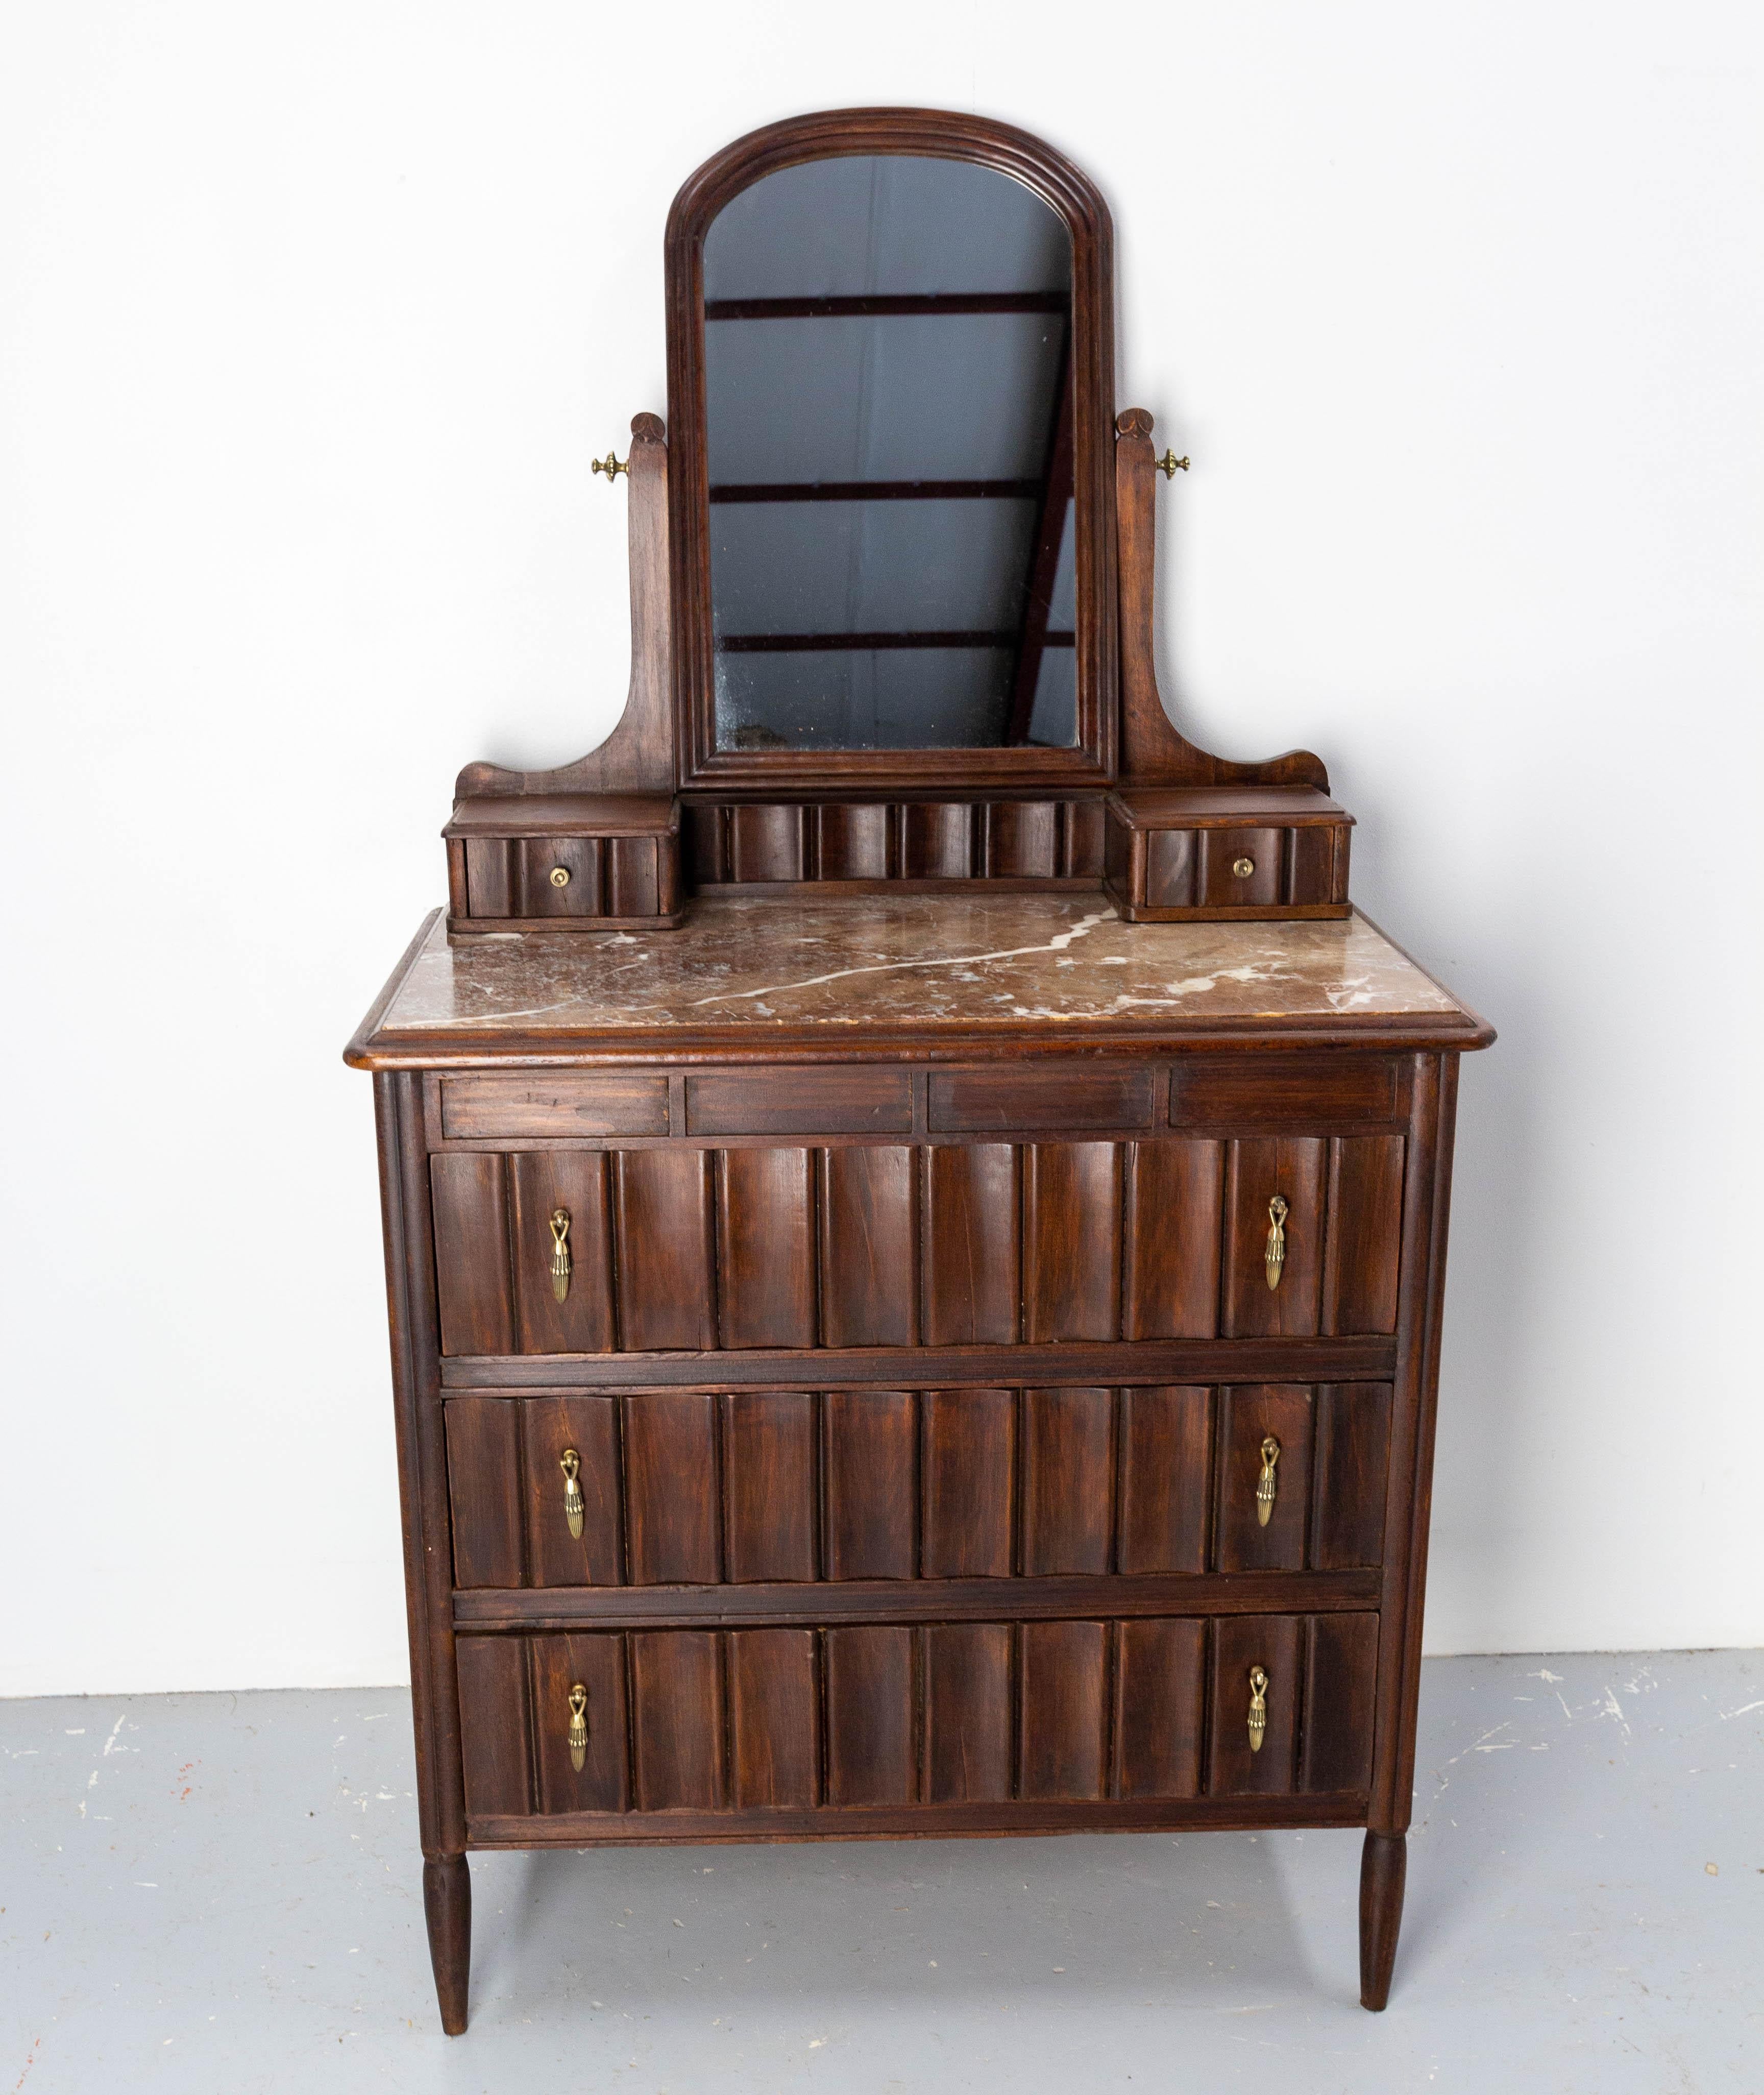 Vanity dressing table with central tilt mirror, two little drawers on the table and three large drawers, made in the Art Déco period
French
Poplar wood tinted, marble and mirror. 
Good antique condition.

